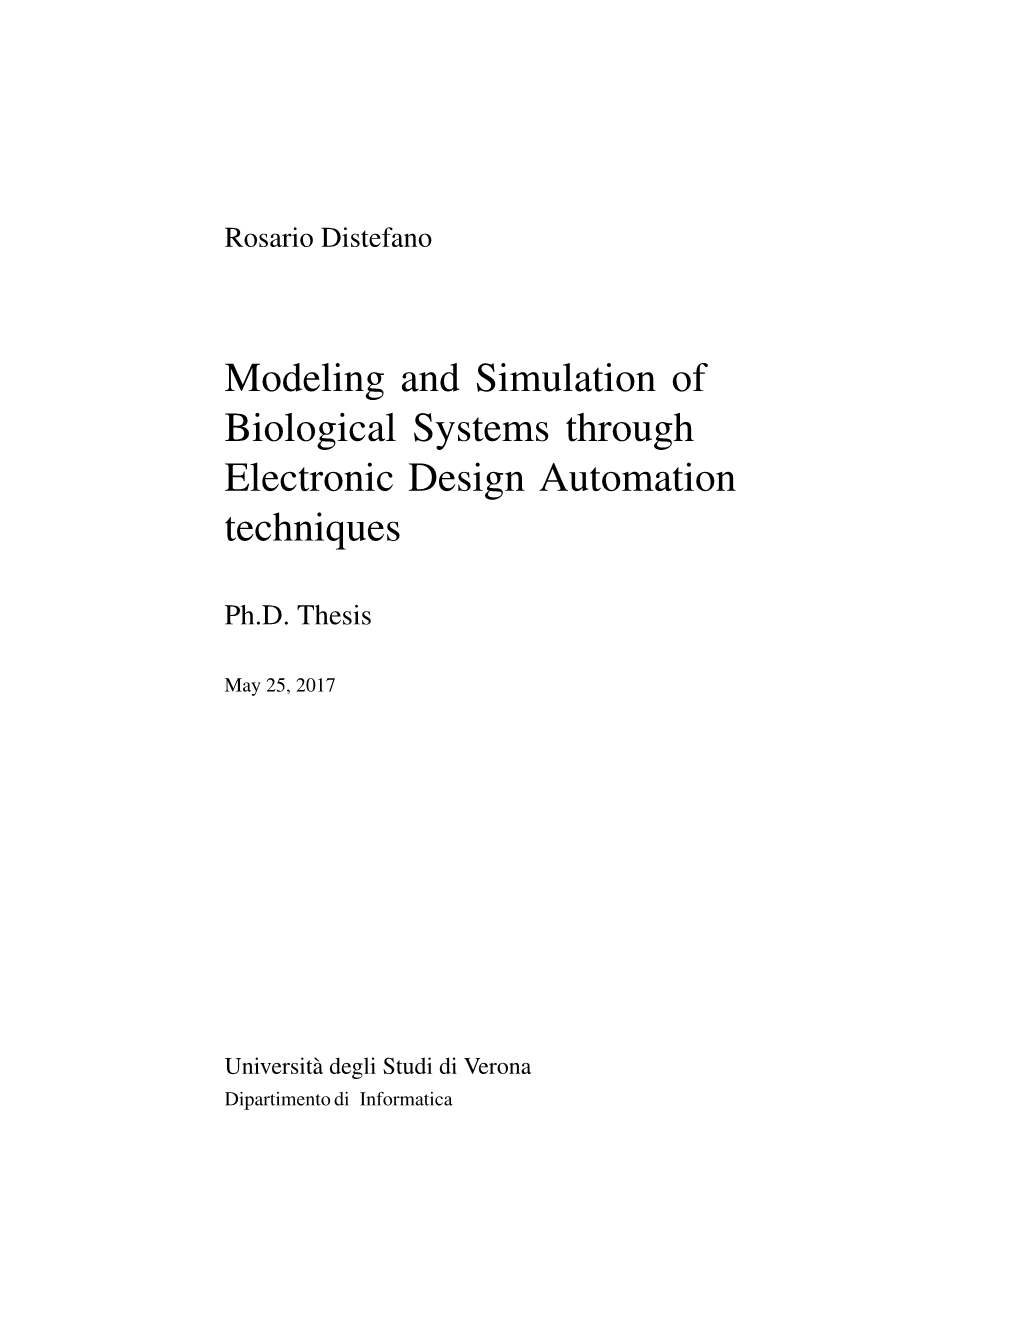 Modeling and Simulation of Biological Systems Through Electronic Design Automation Techniques